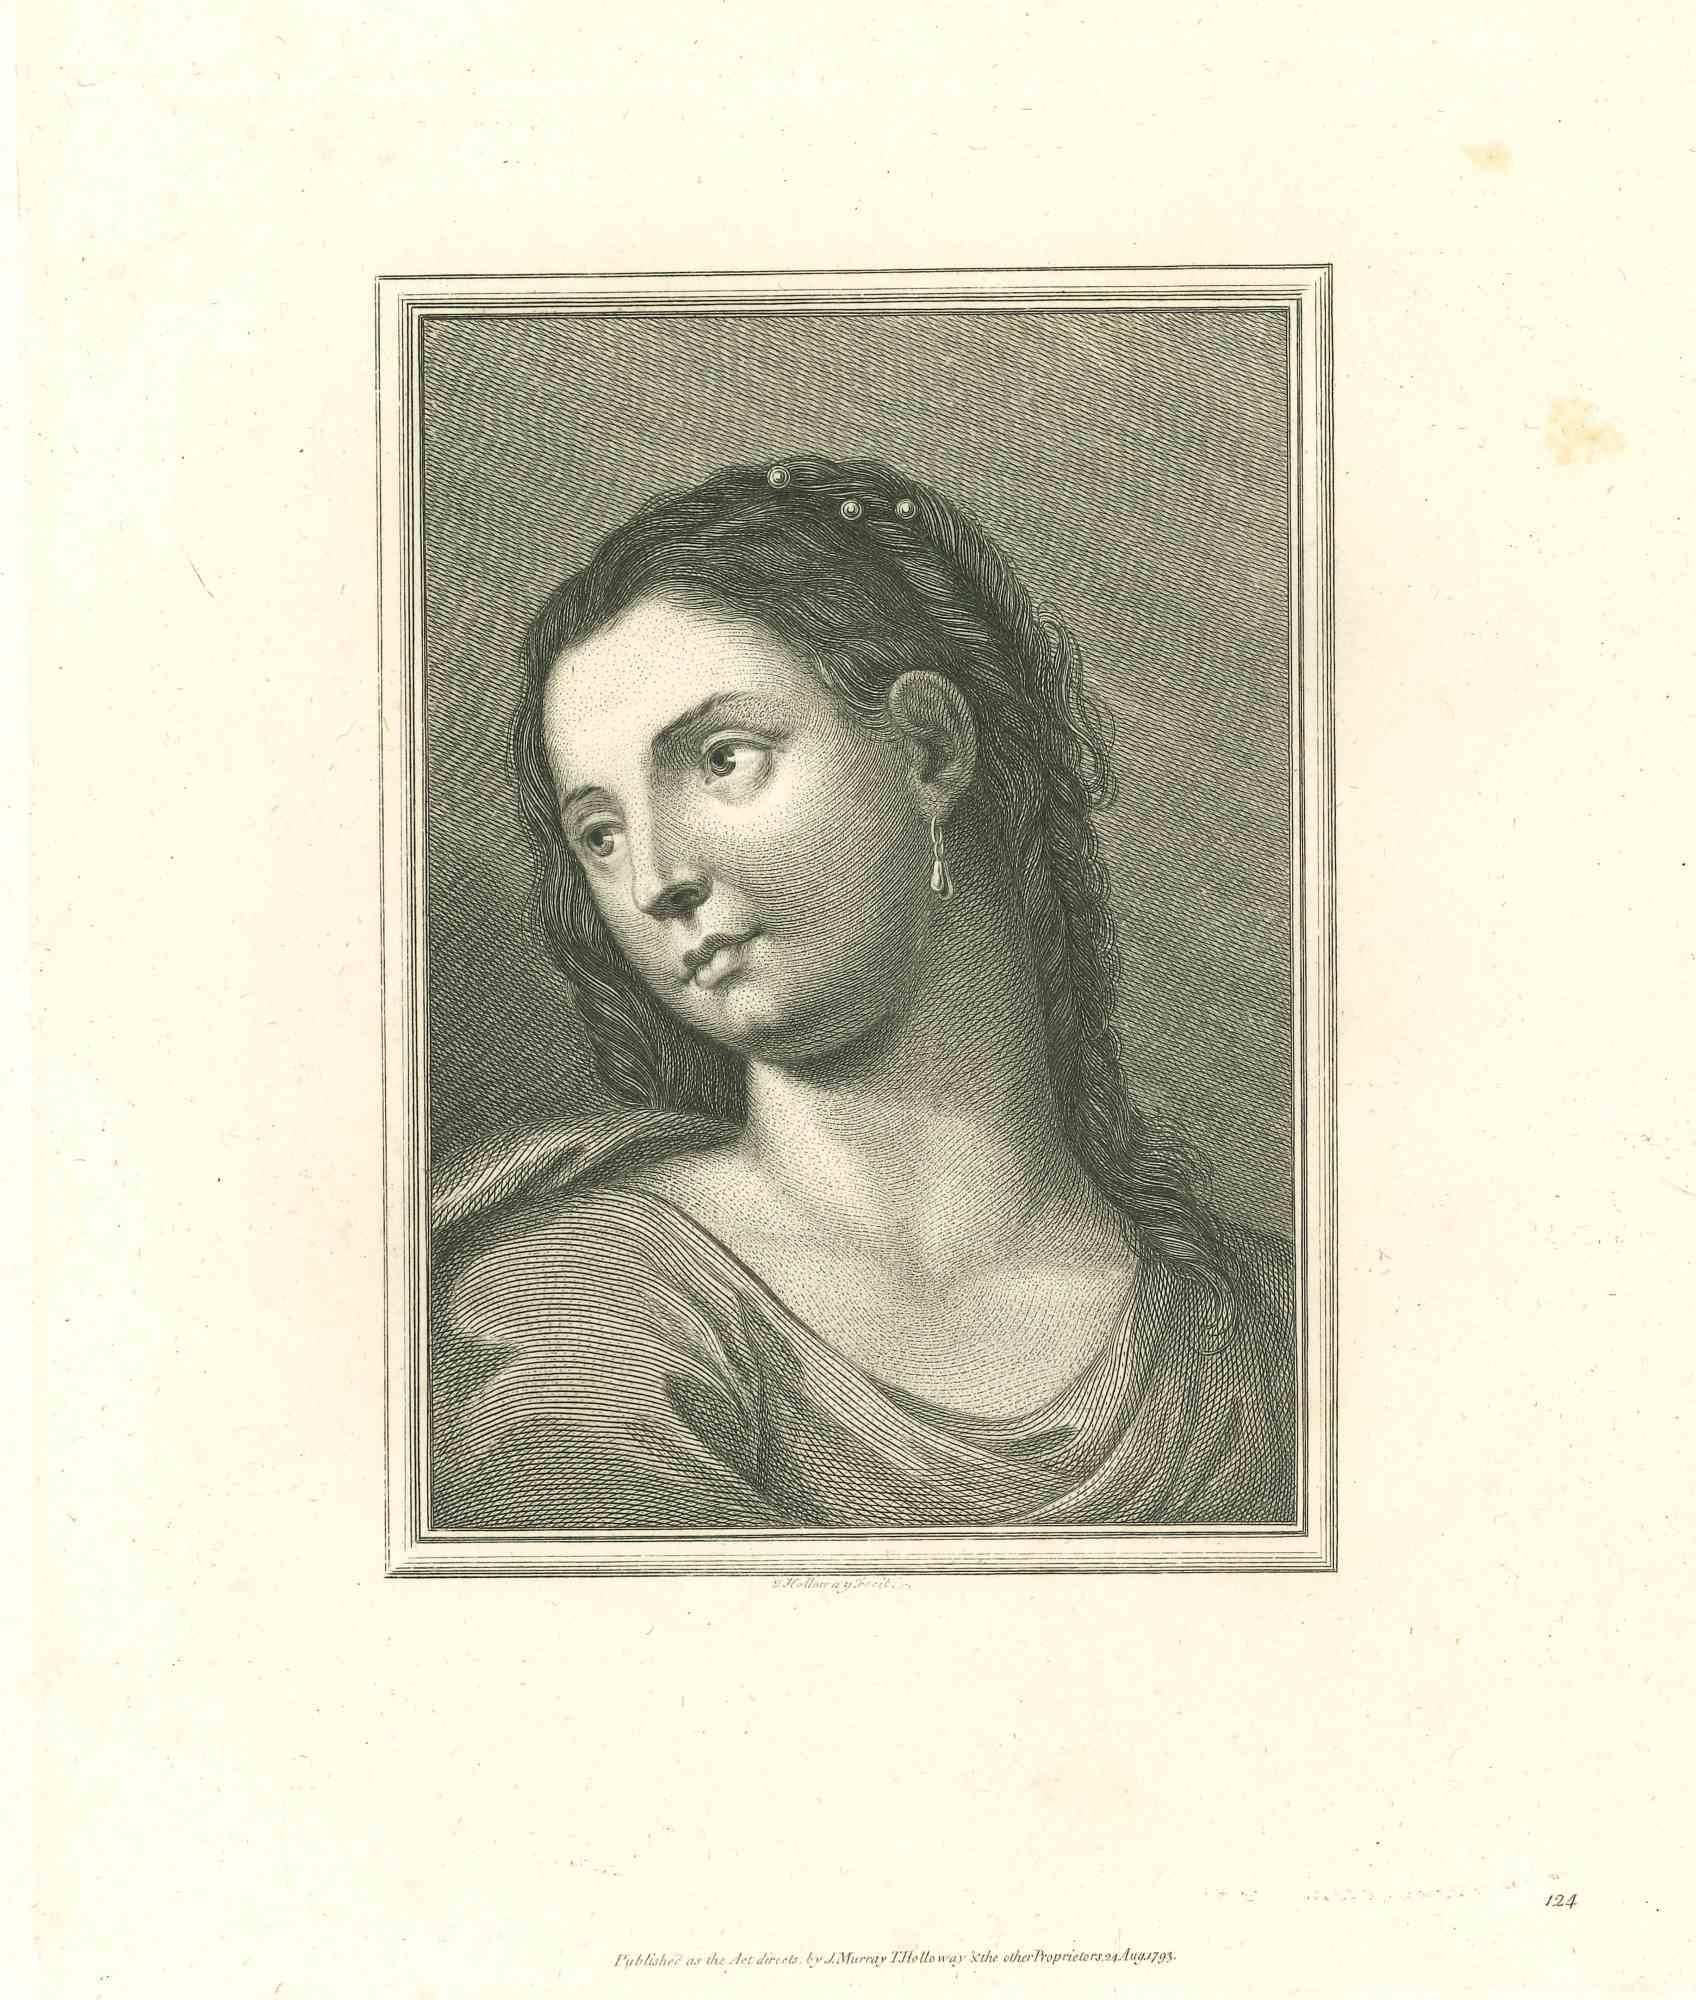 Portrait is an original artwork realized by Thomas Holloway (1748 - 1827).

Original Etching from J.C. Lavater's "Essays on Physiognomy, Designed to promote the Knowledge and the Love of Mankind", London, Bensley, 1810. 

This artwork portrays a